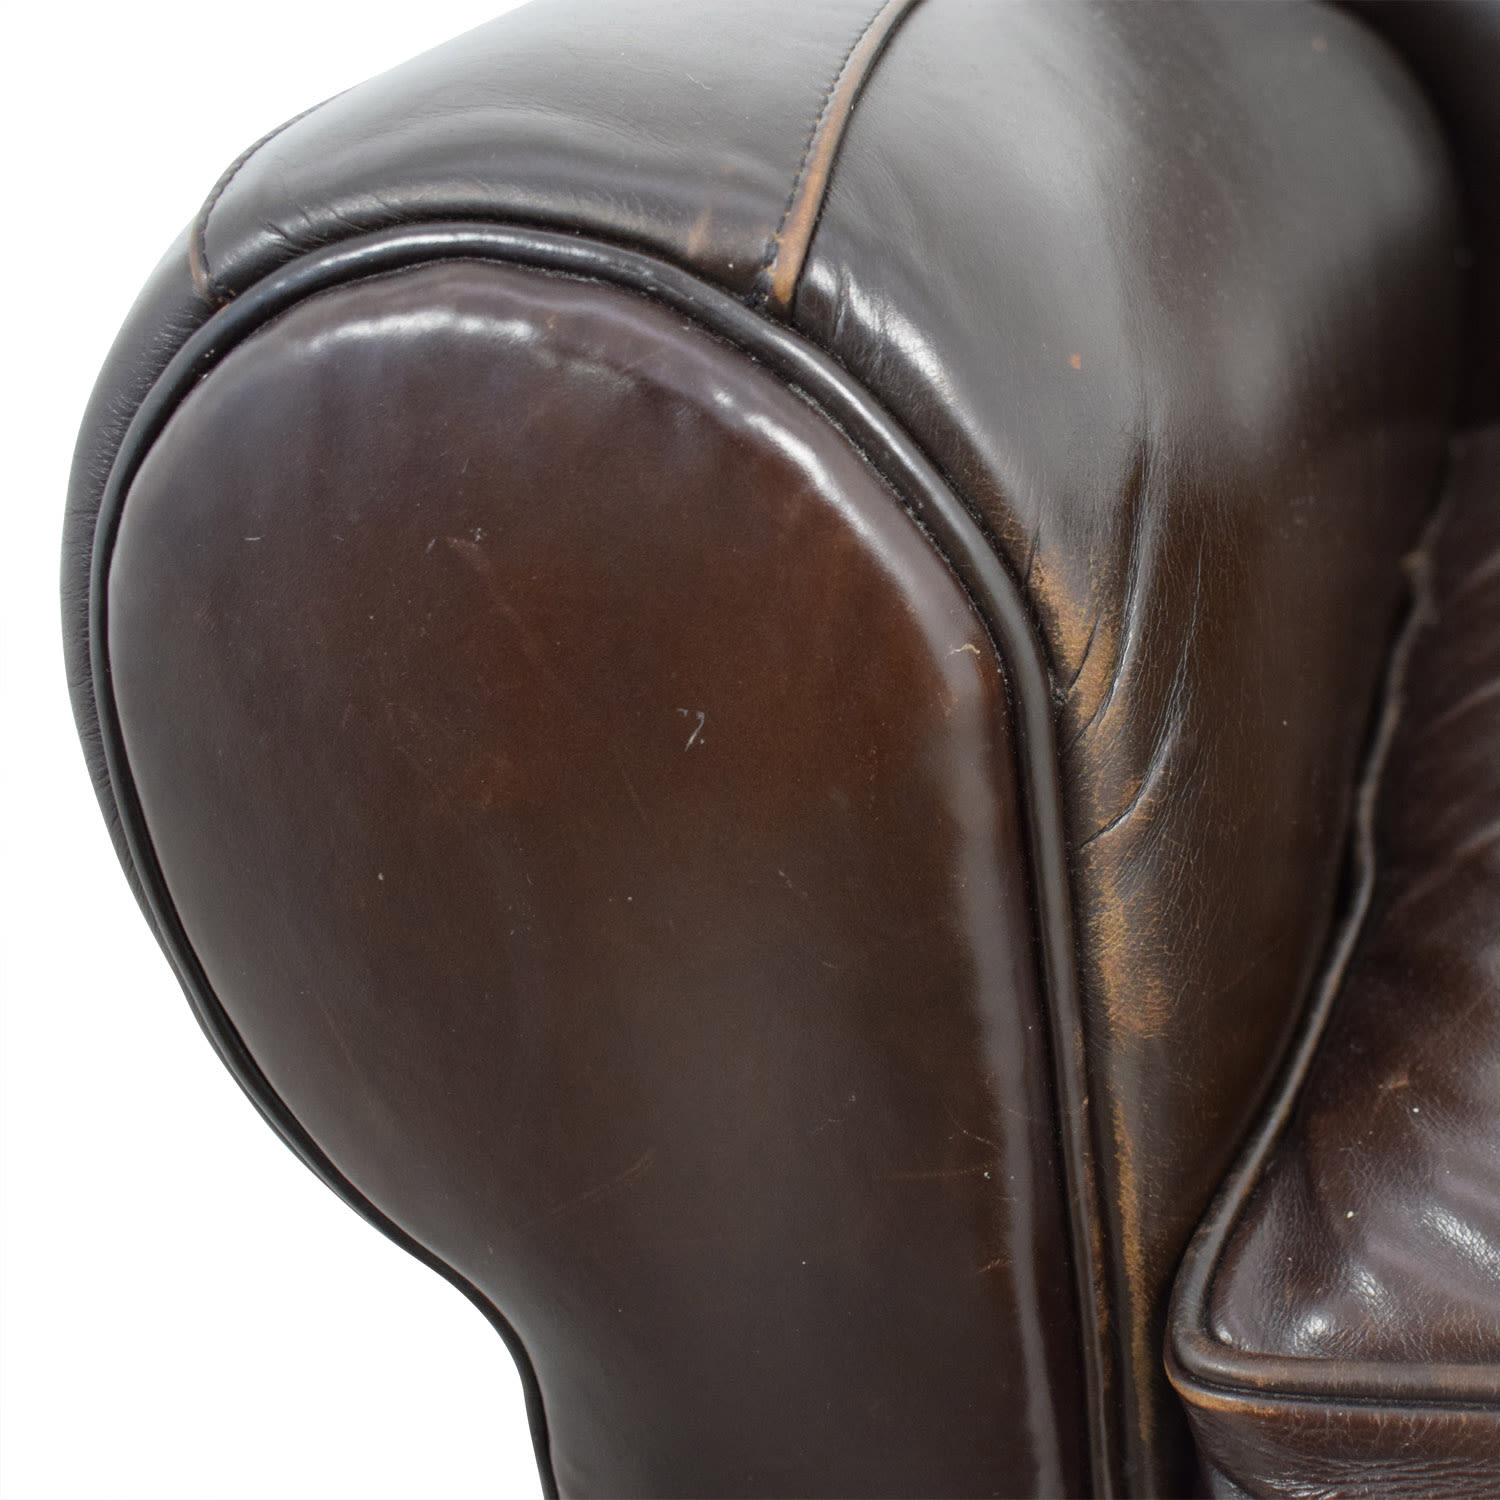 Pottery Barn Pottery Barn Brown Leather Chair for sale